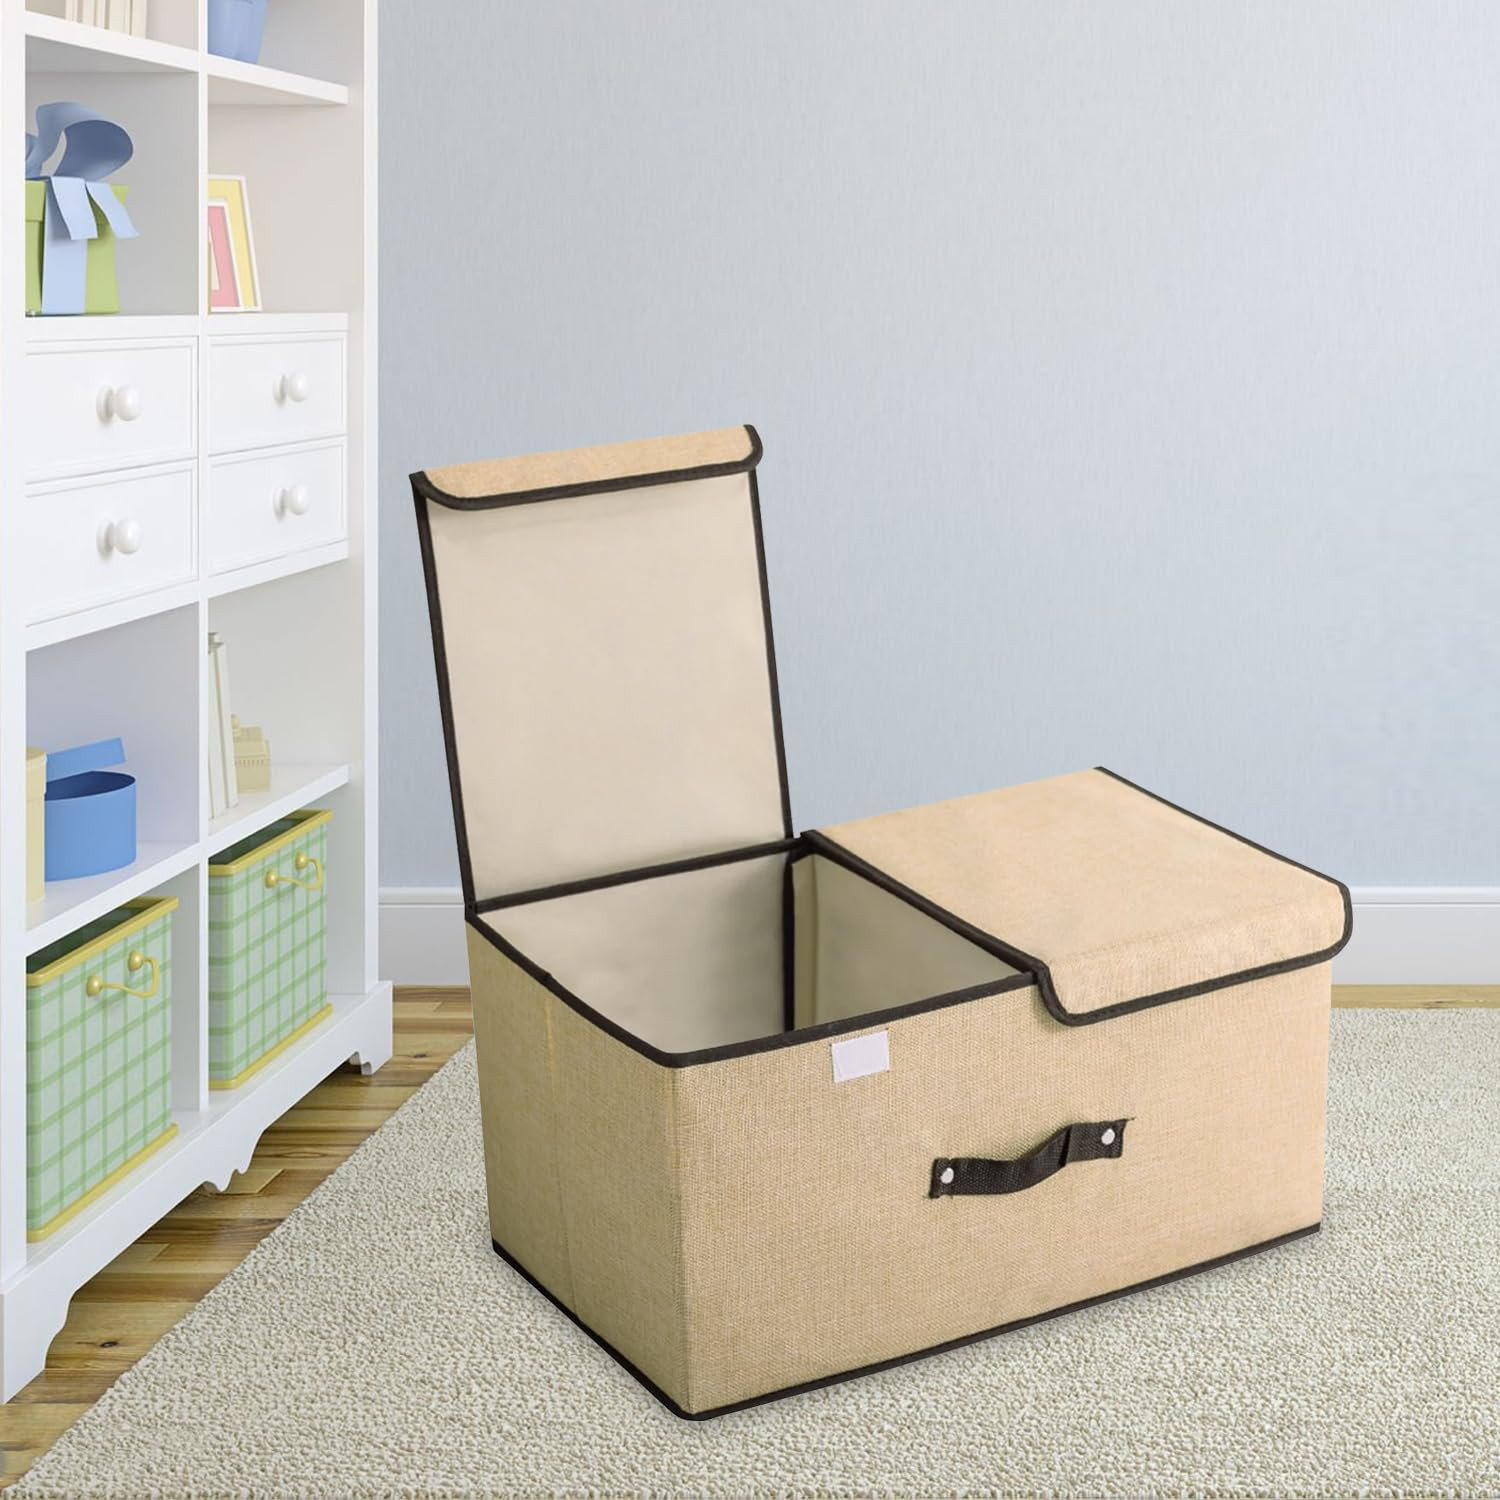 Kuber Industries Double Lid Foldable Storage Box|Toys Storage Bin|Wardrobe Organizer For Clothes|Front Handle & Stackable (Beige)